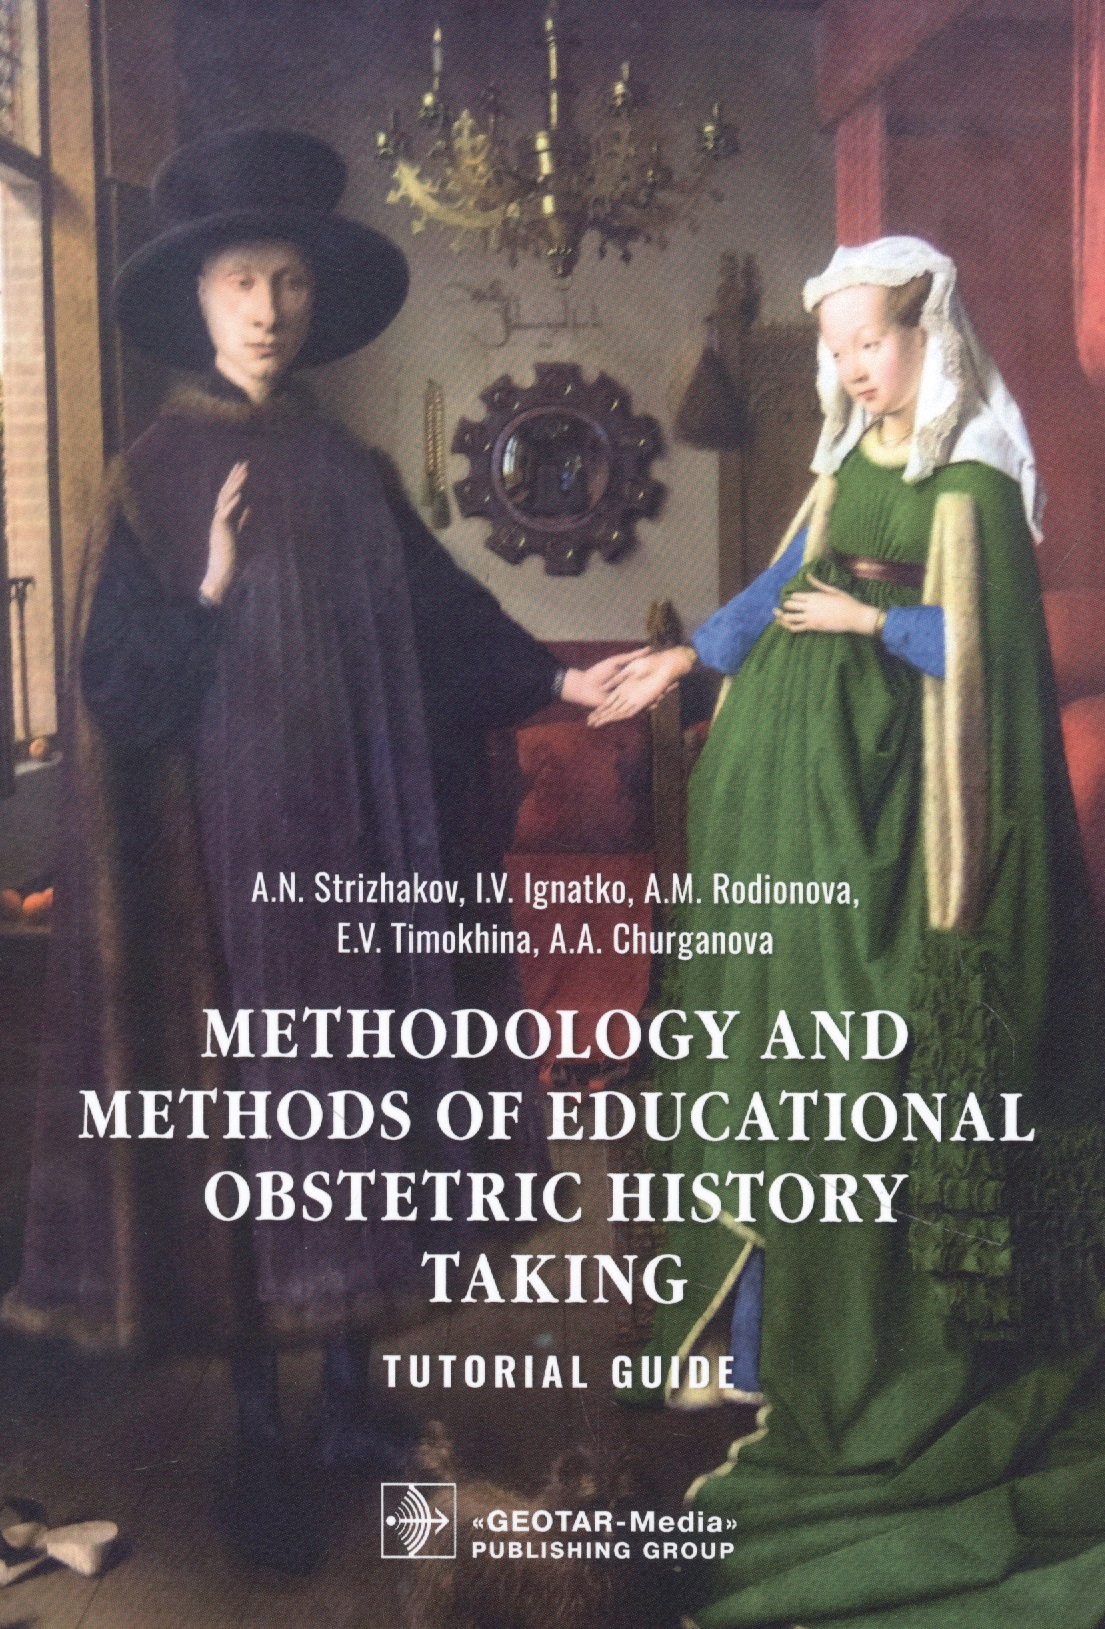 Methodology and methods of educational obstetric history taking